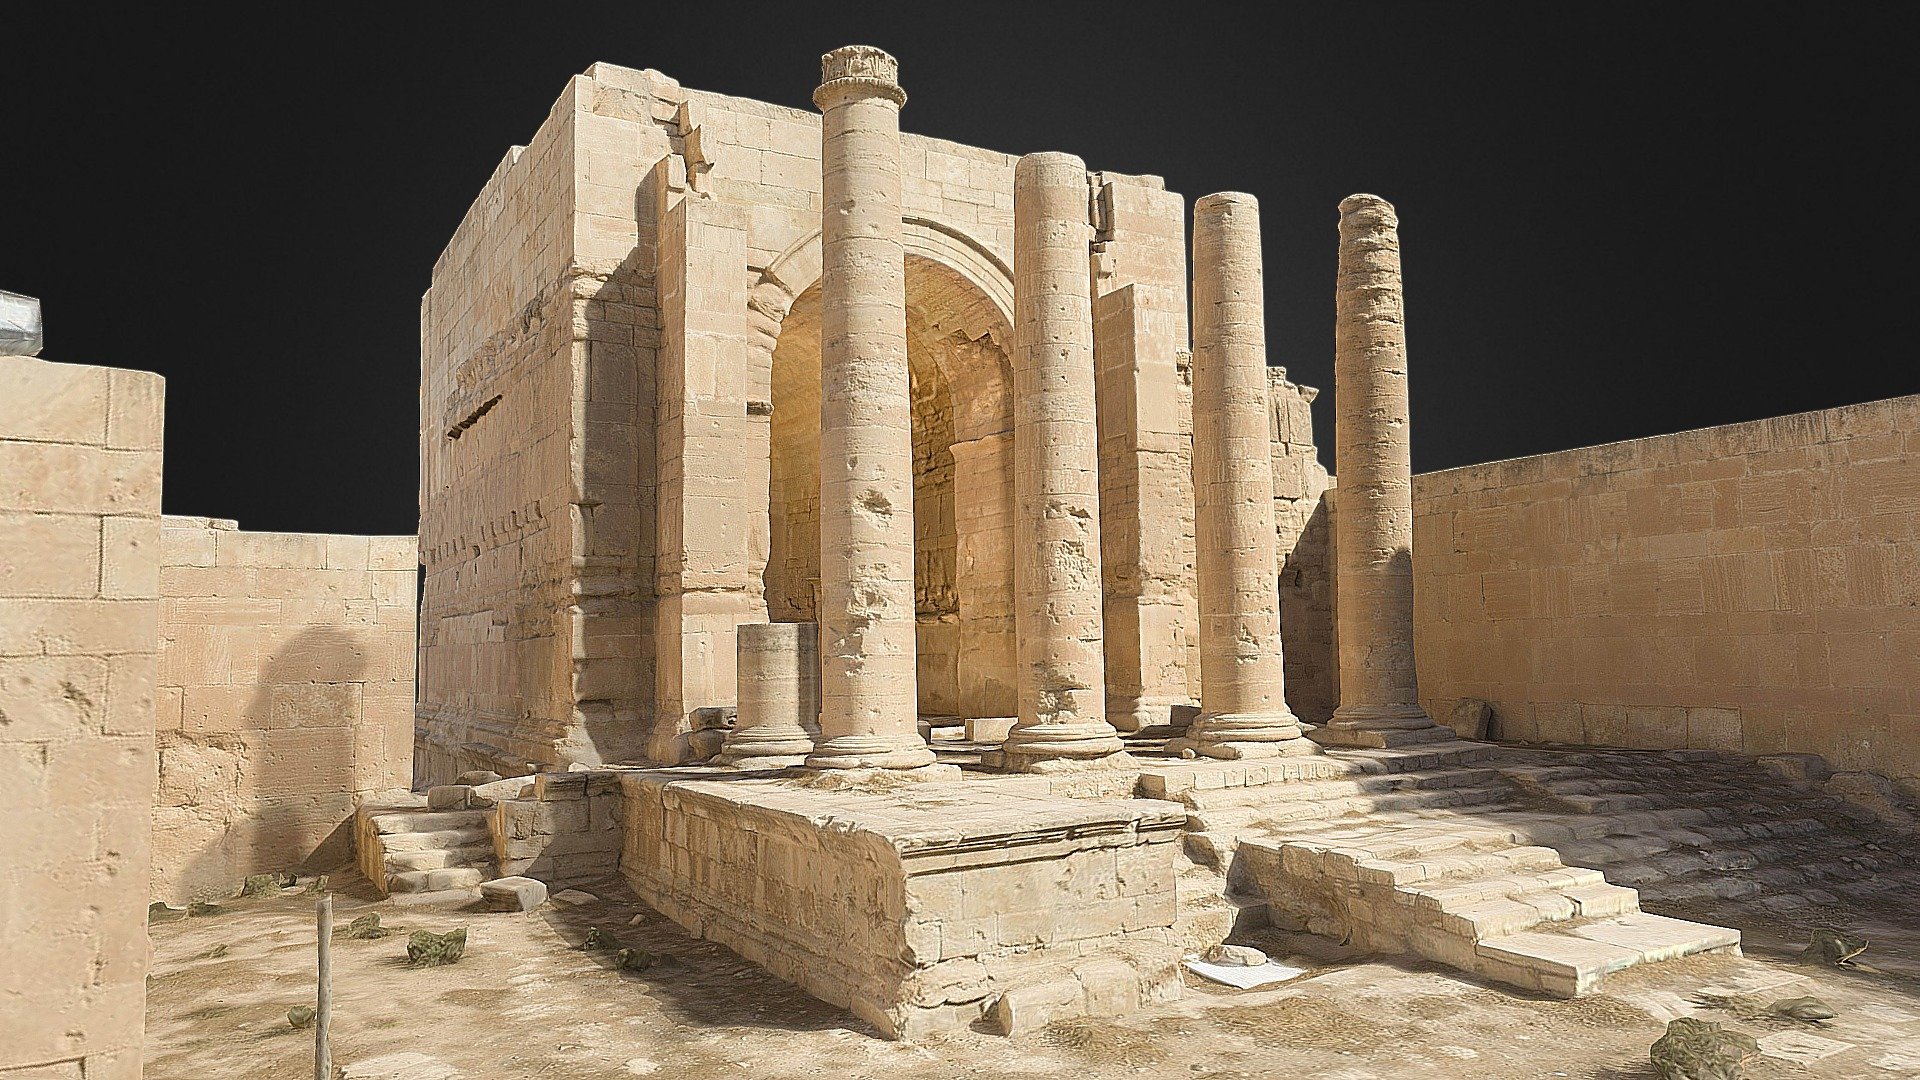 Low poly 3d model of the Temple of Shahiru in Hatra. more info at www.savinghatra.org - Hatra -  Temple of Shahiru - 3D model by ATS 3d model